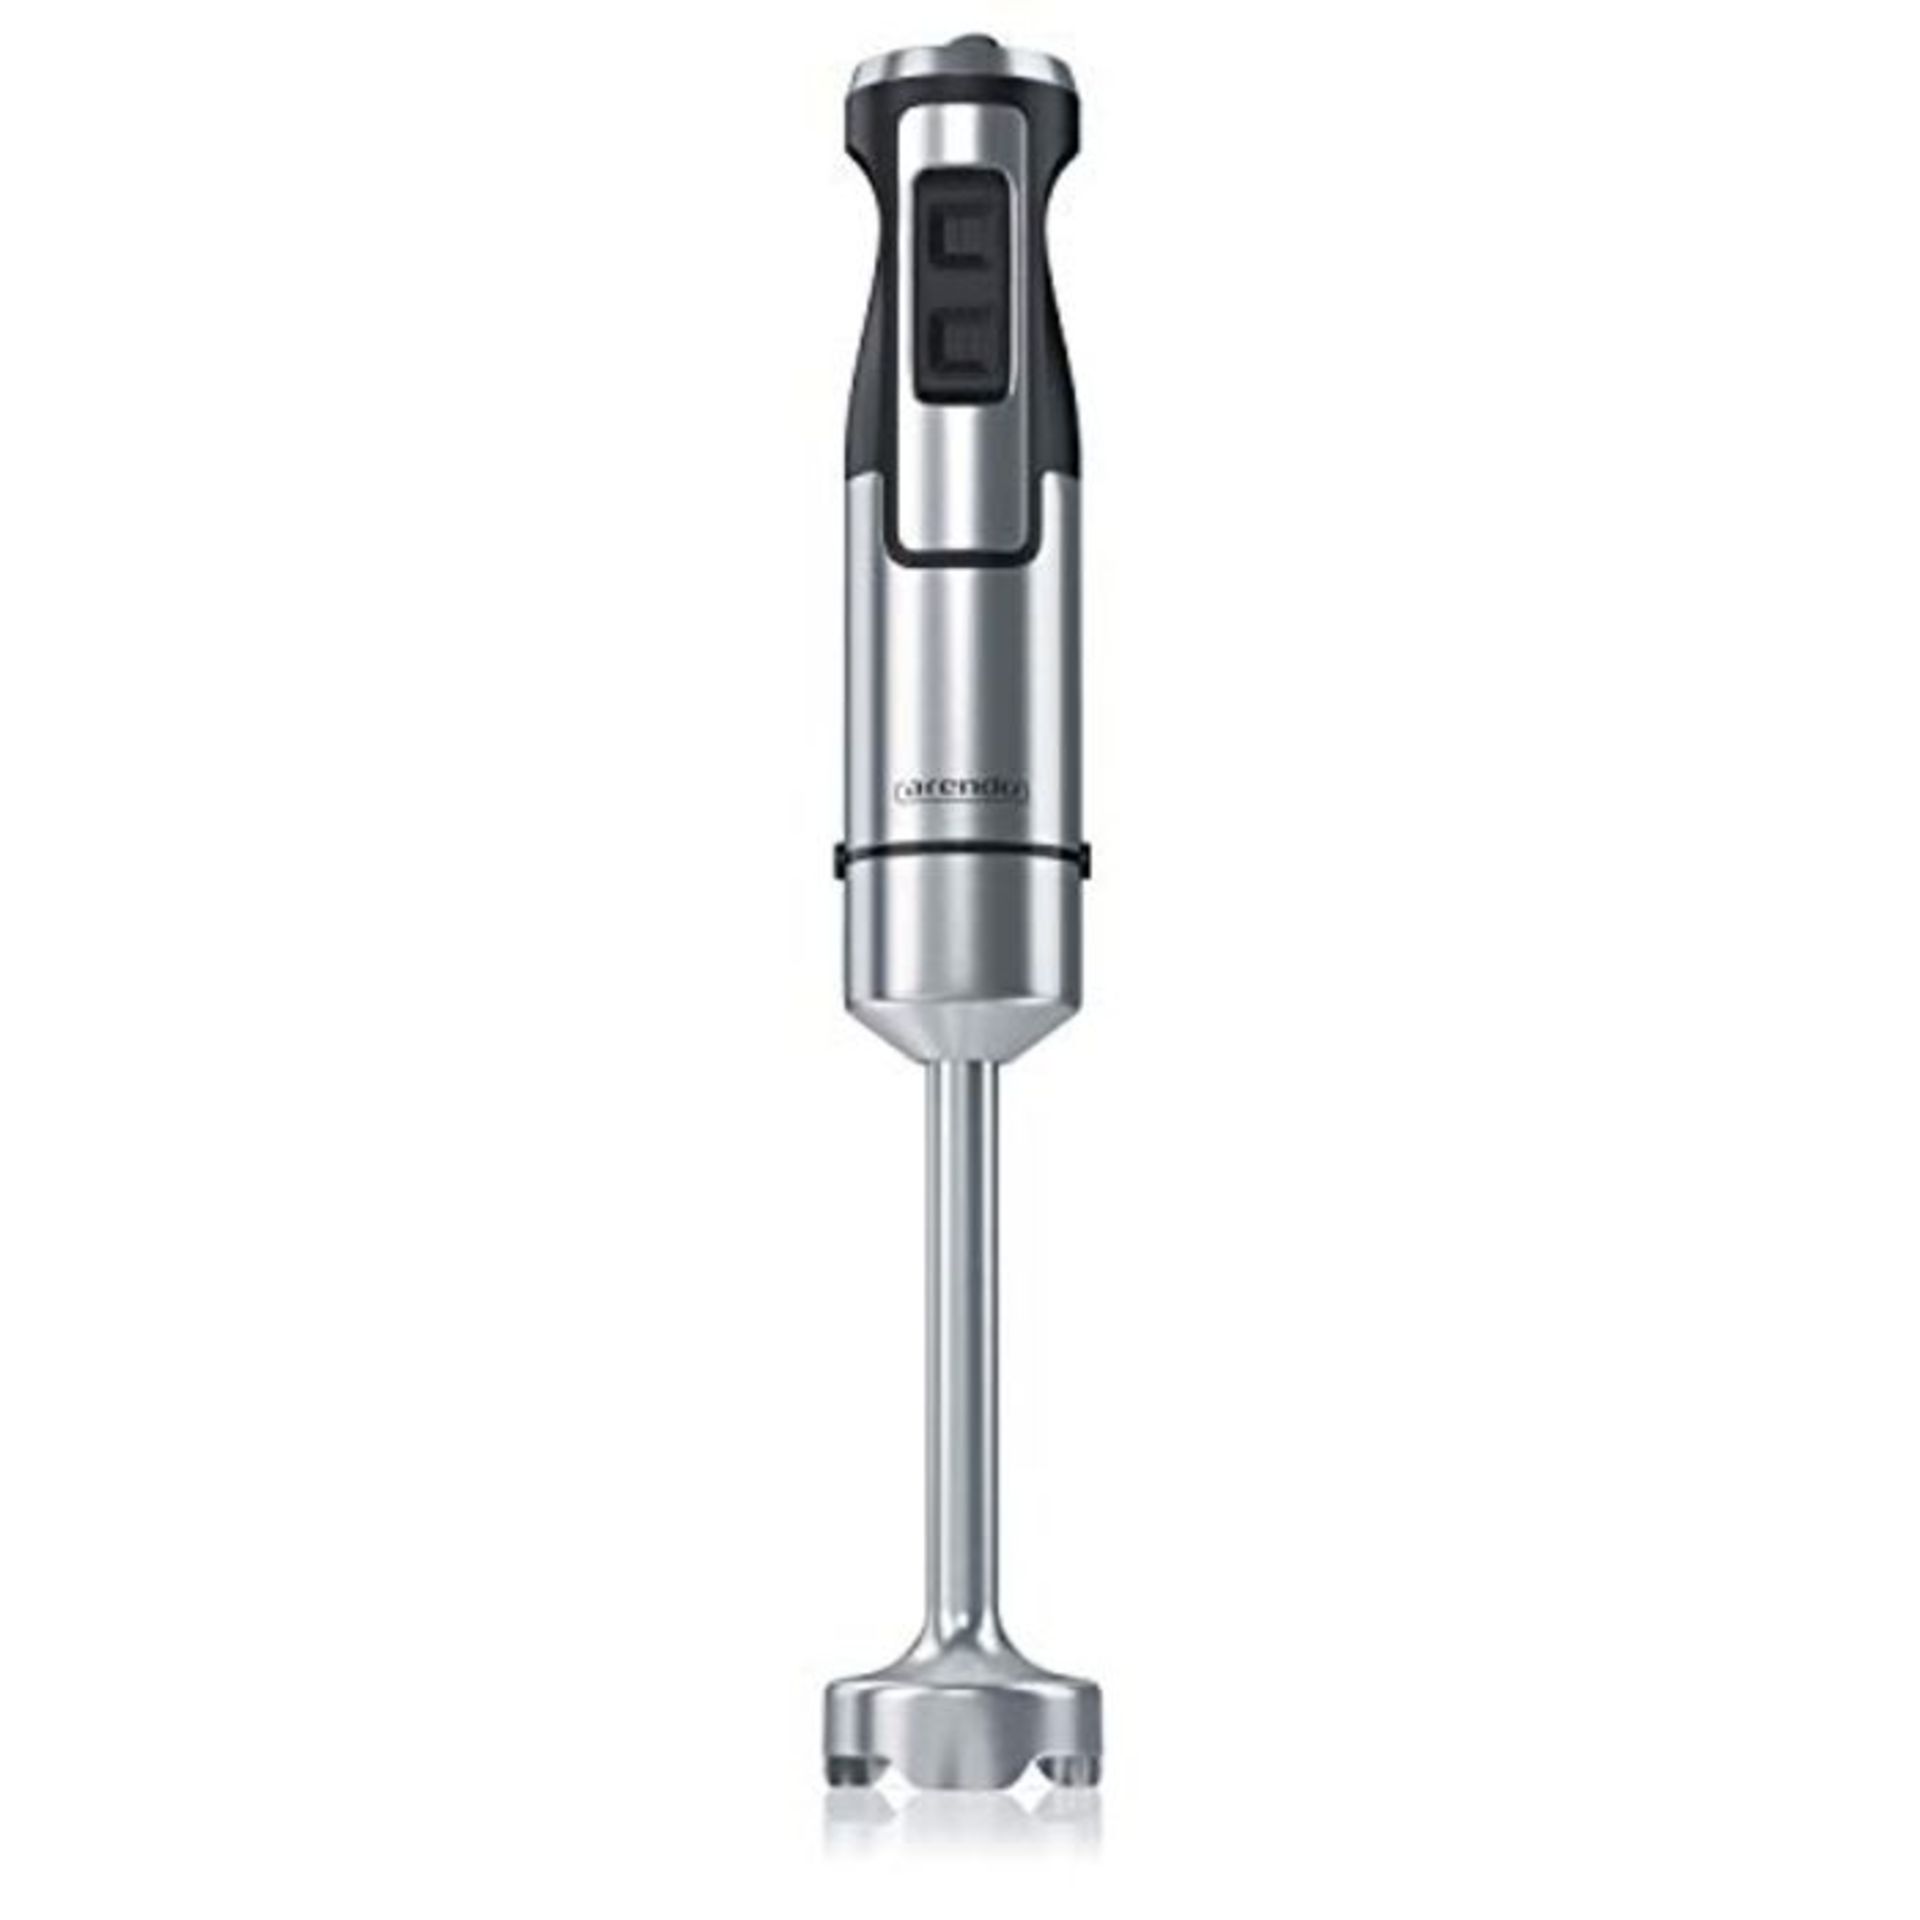 Arendo - Hand blender 1000 watt stainless steel - four-wing knife - purée rod - conti